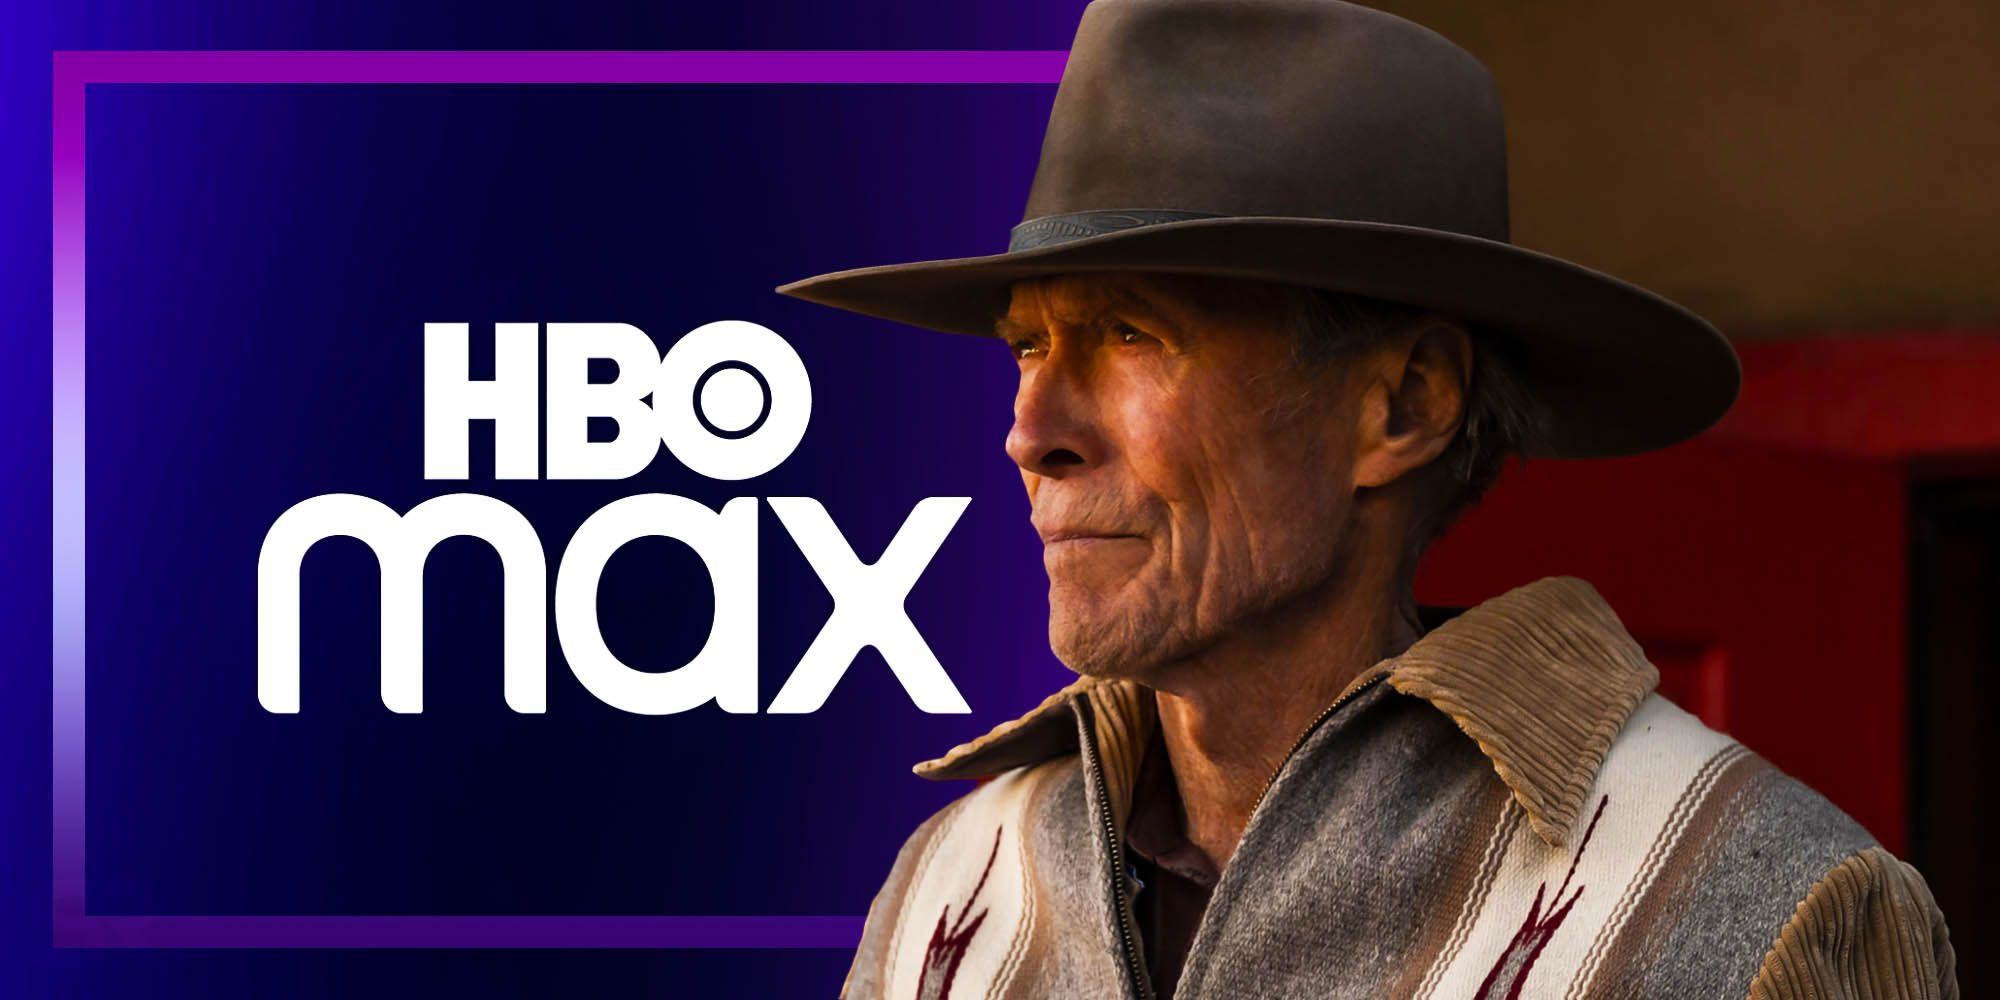 What time does Cry macho released on HBO max